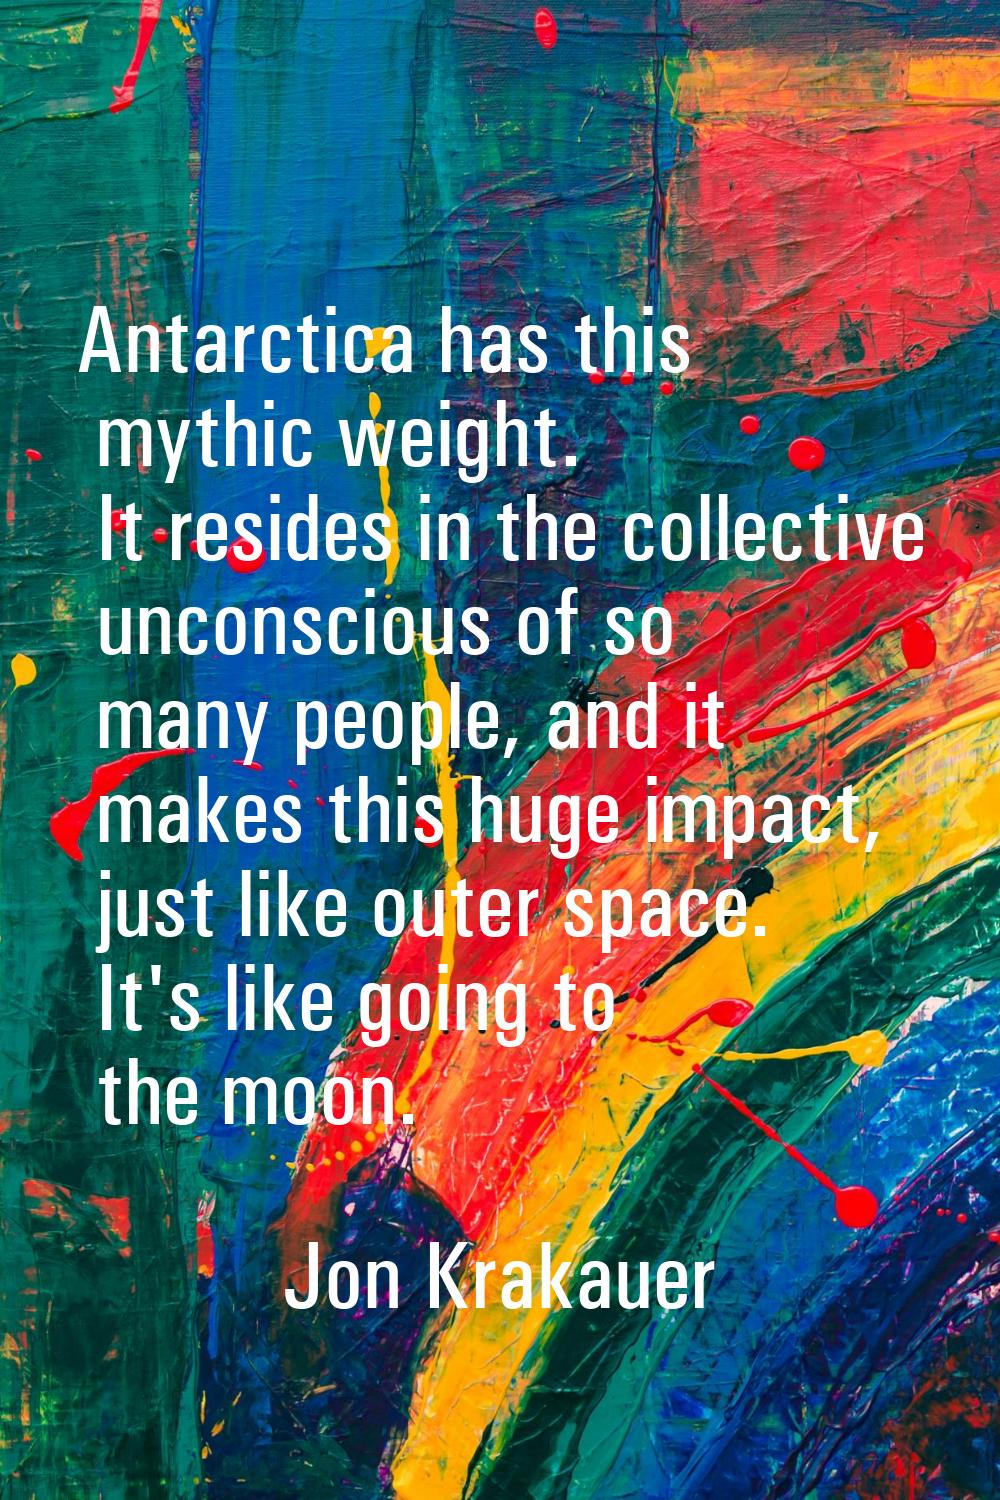 Antarctica has this mythic weight. It resides in the collective unconscious of so many people, and 